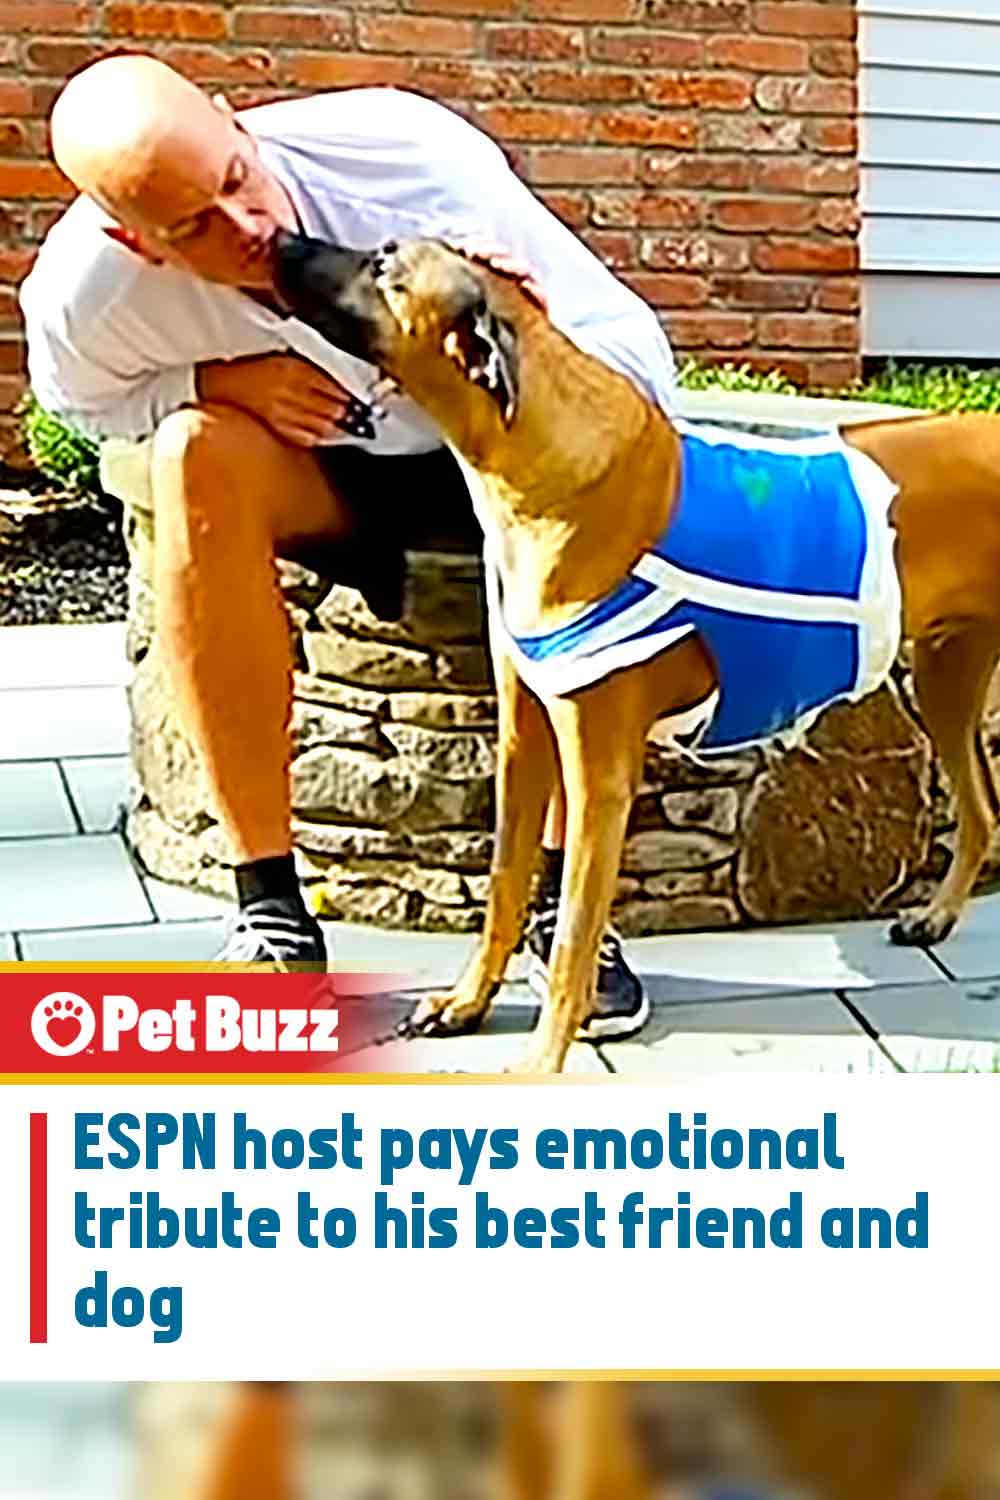 ESPN host pays emotional tribute to his best friend and dog